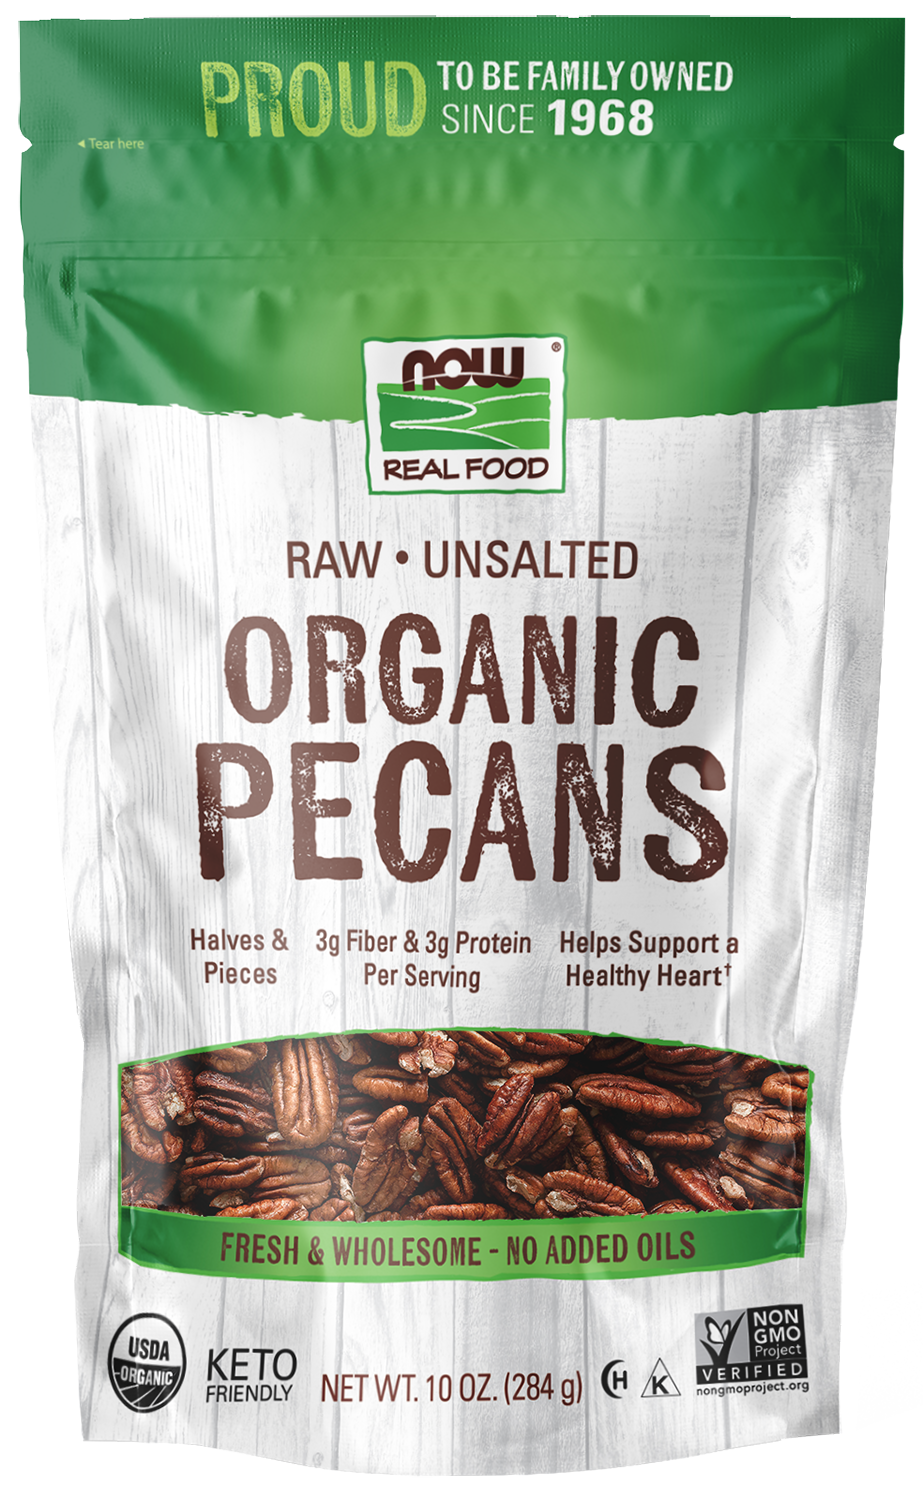 Pecans, Organic, Raw & Unsalted - 10 oz. Bag Front